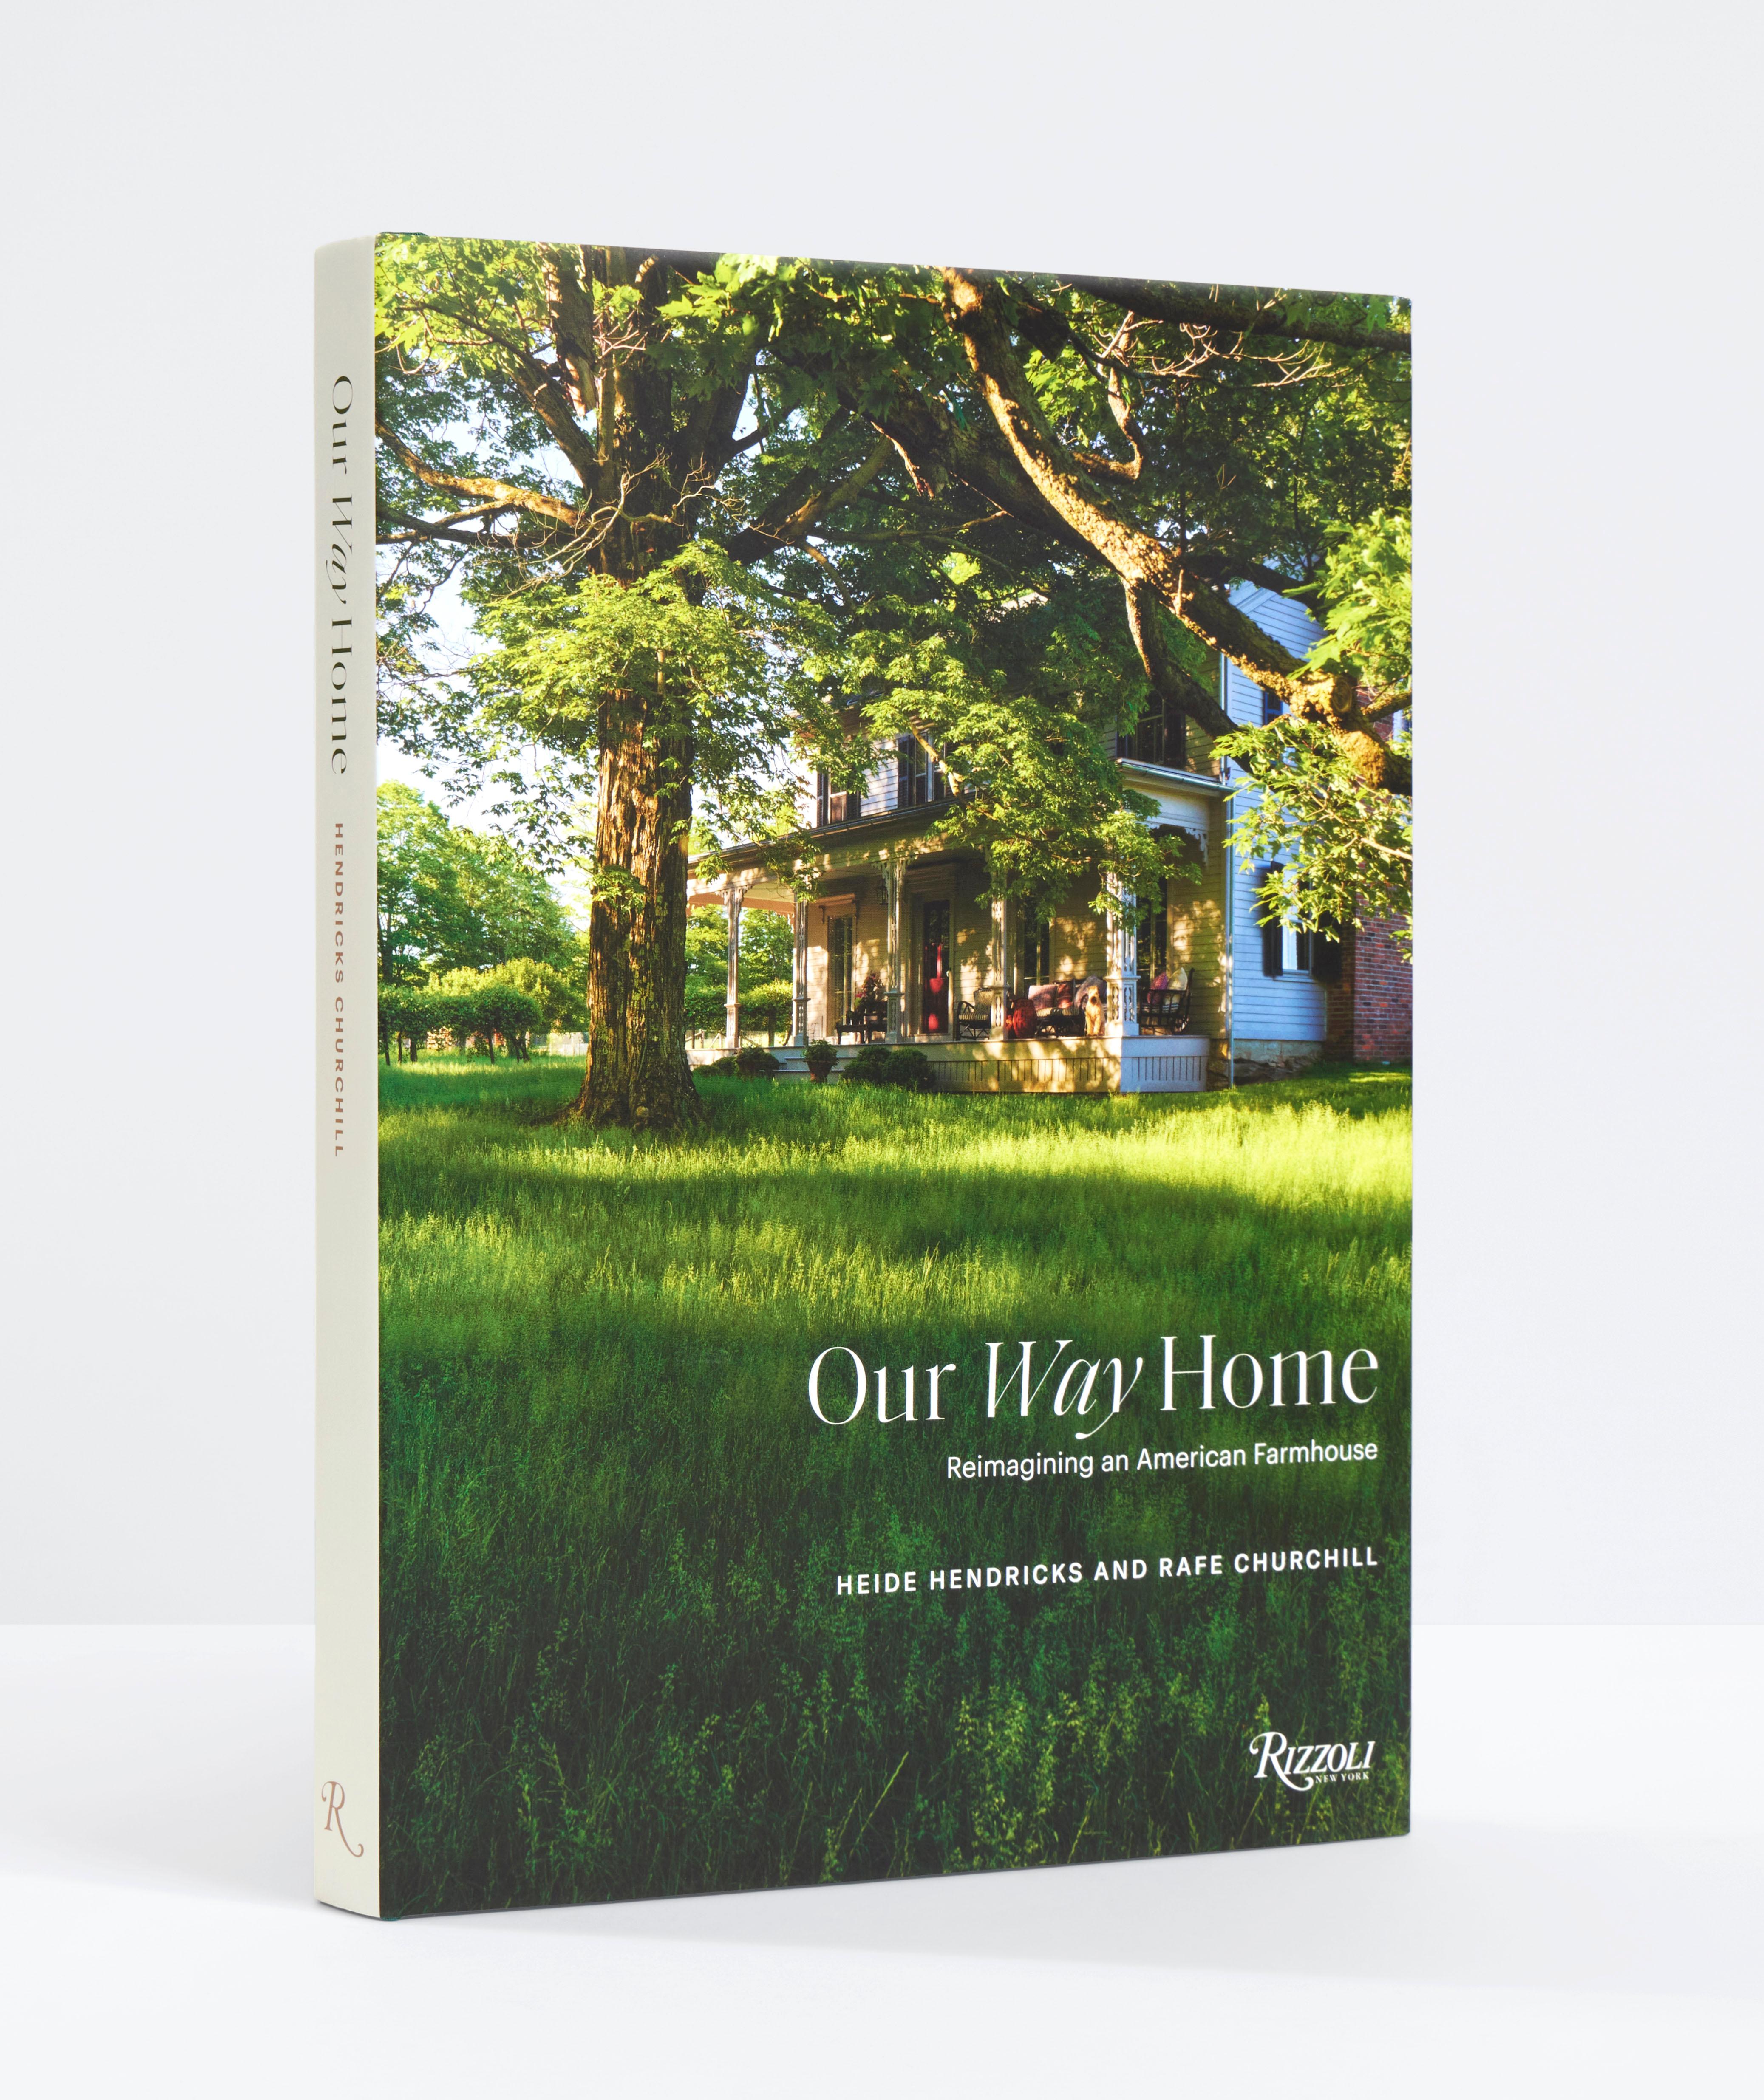 This title publishes September 5th, 2023 and will ship on or after for early orders. 

Author Heide Hendricks and Rafe Churchill, with Laura Chávez Silverman, Foreword by Asad Syrkett, Photographs by Chris Motallini

The glorious Connecticut